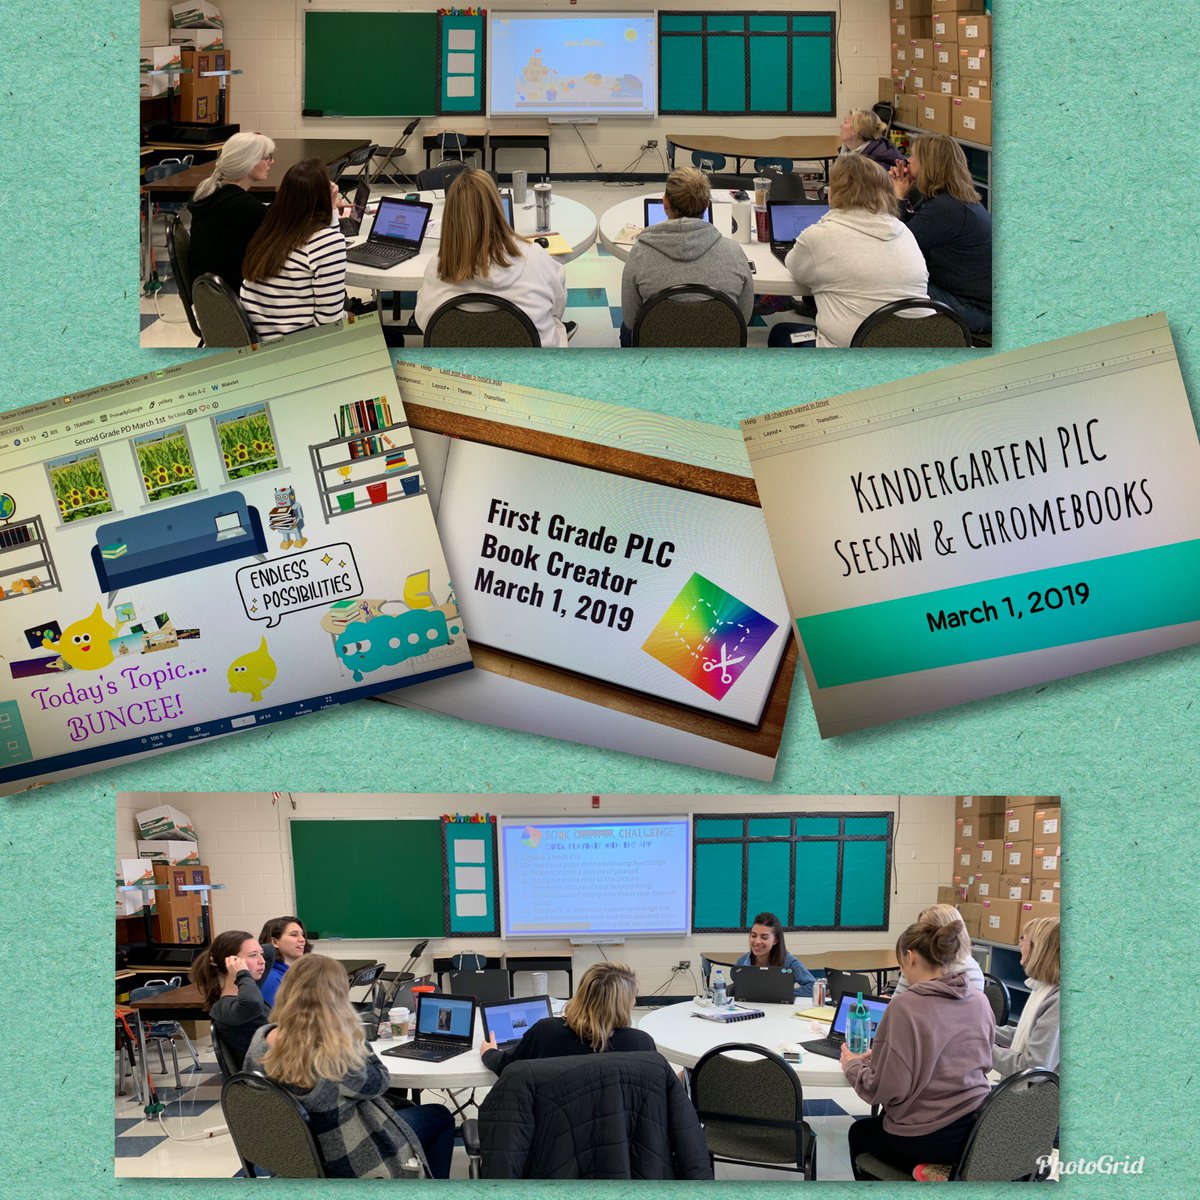 PLC time is great when we can learn together w creative tools to help our Ss stay engaged, excited & creators vs consumers! #interactivetools #d60learns some of our favorite tools in K-2 @Seesaw @BookCreatorApp @Buncee